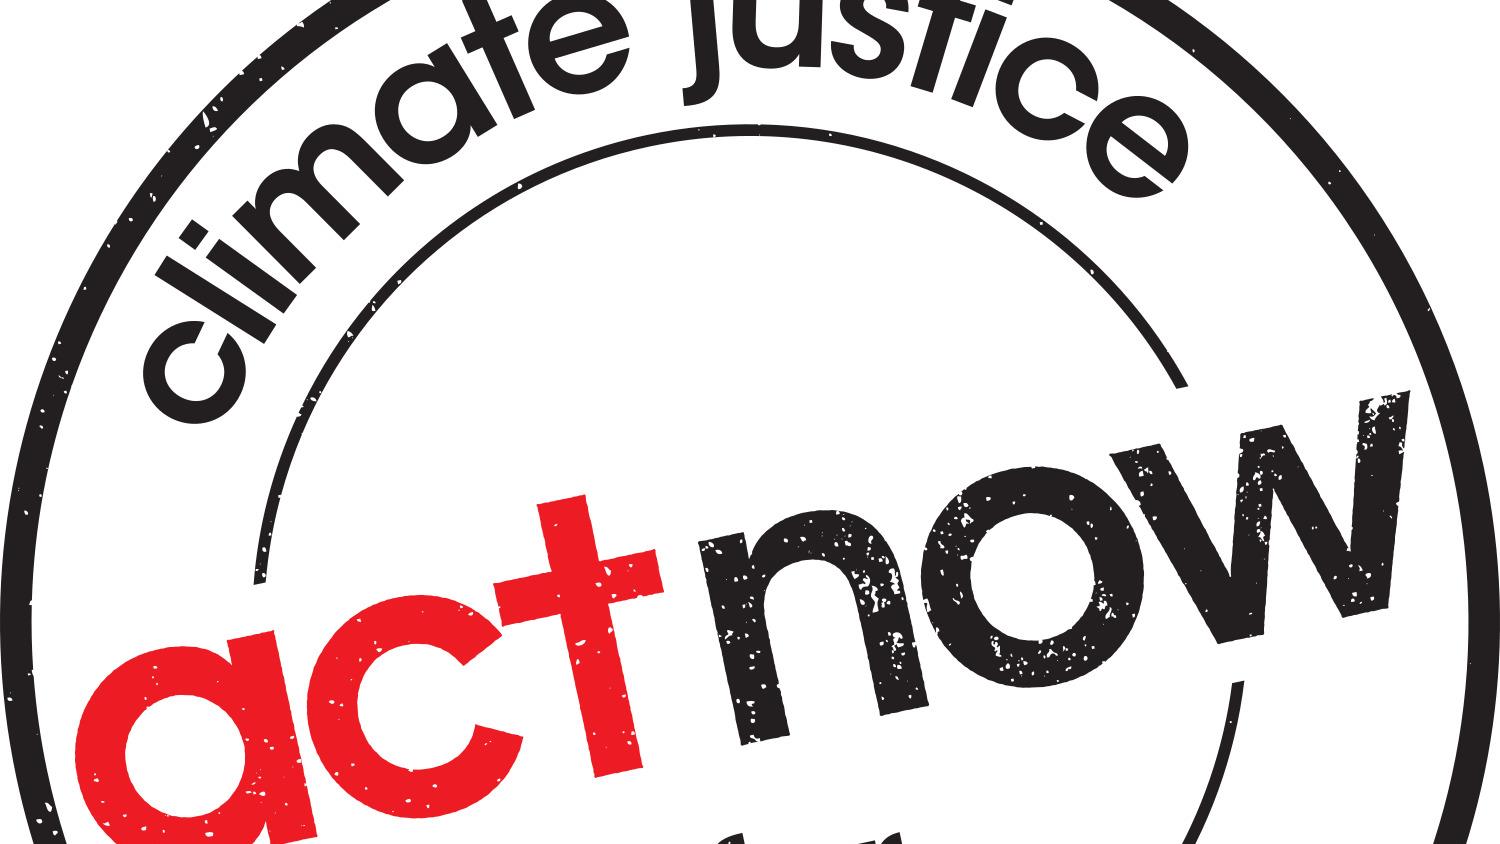 ACT climate justice